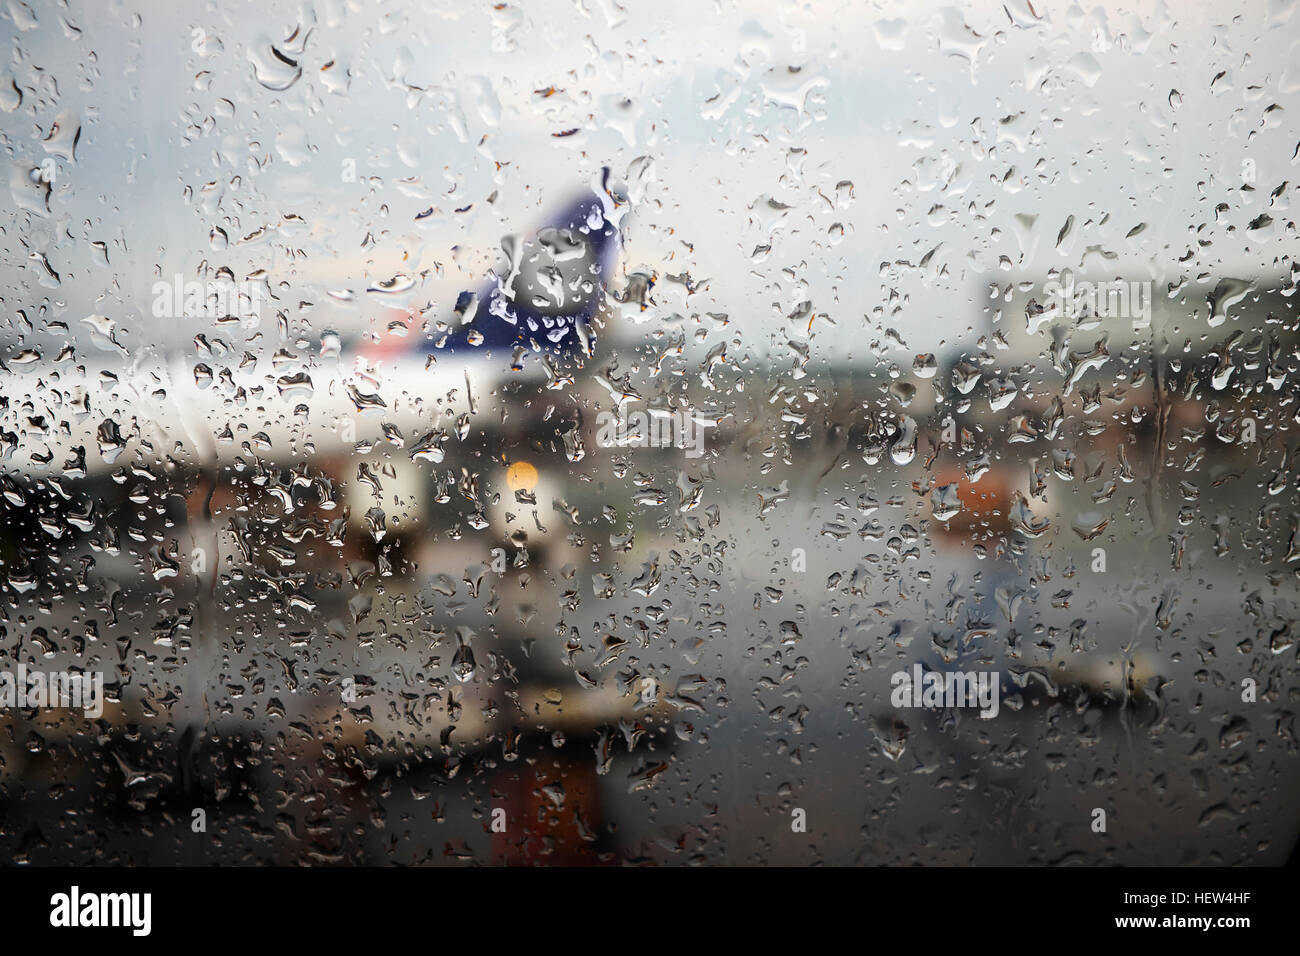 Window view of airplane parked in airport apron in rain Stock Photo